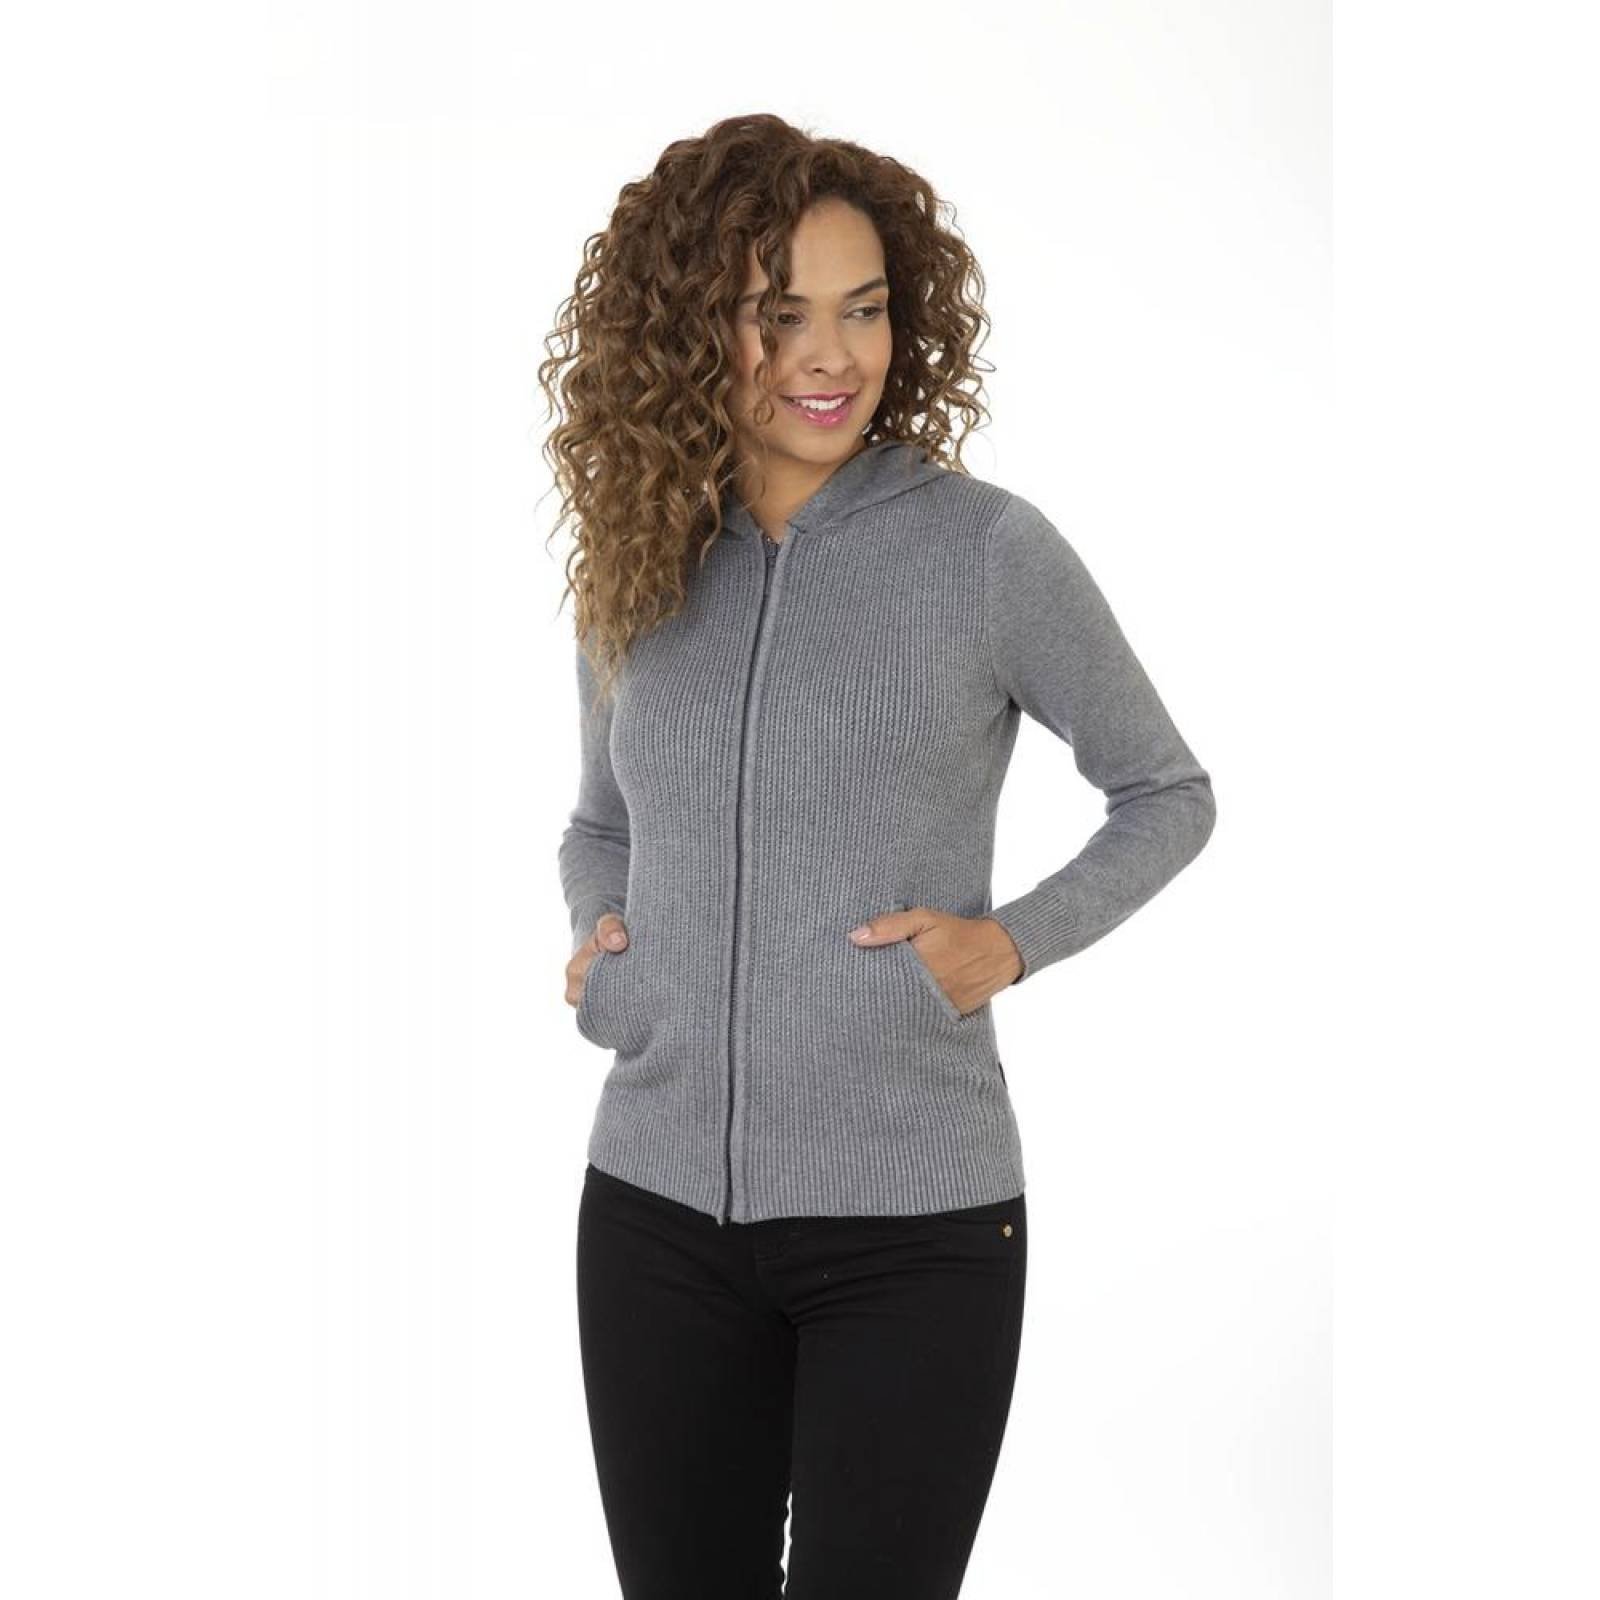 SWEATER CAPRICHO MUJER GRIS SPANDEX CNS 134 